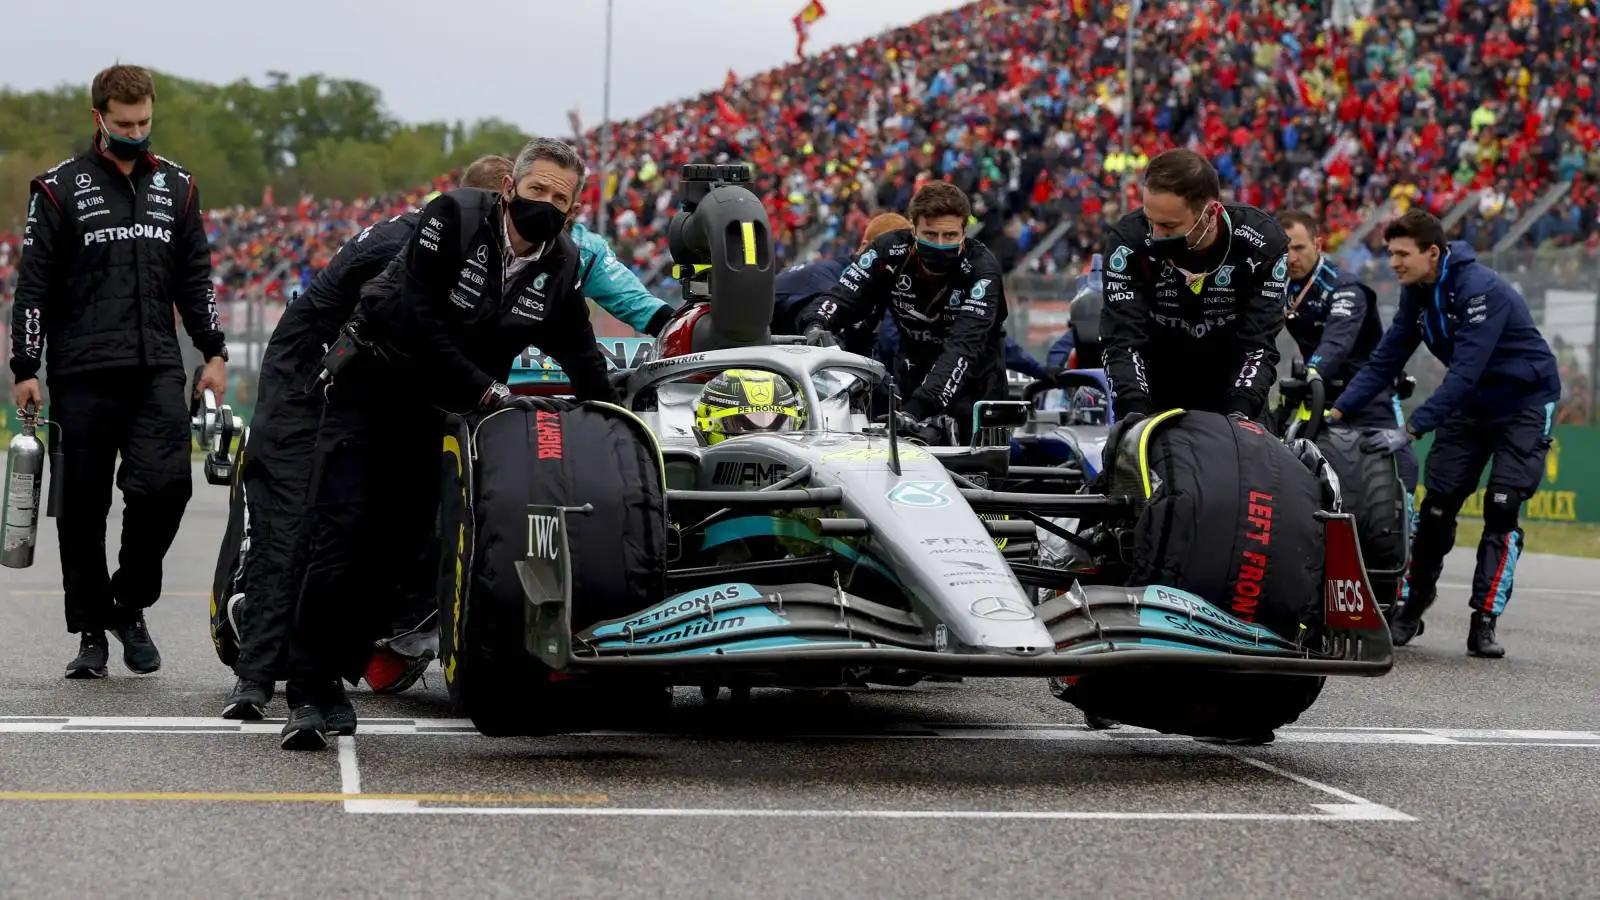 Mercedes put Lewis Hamilton into place on the grid. Italy, April 2022.